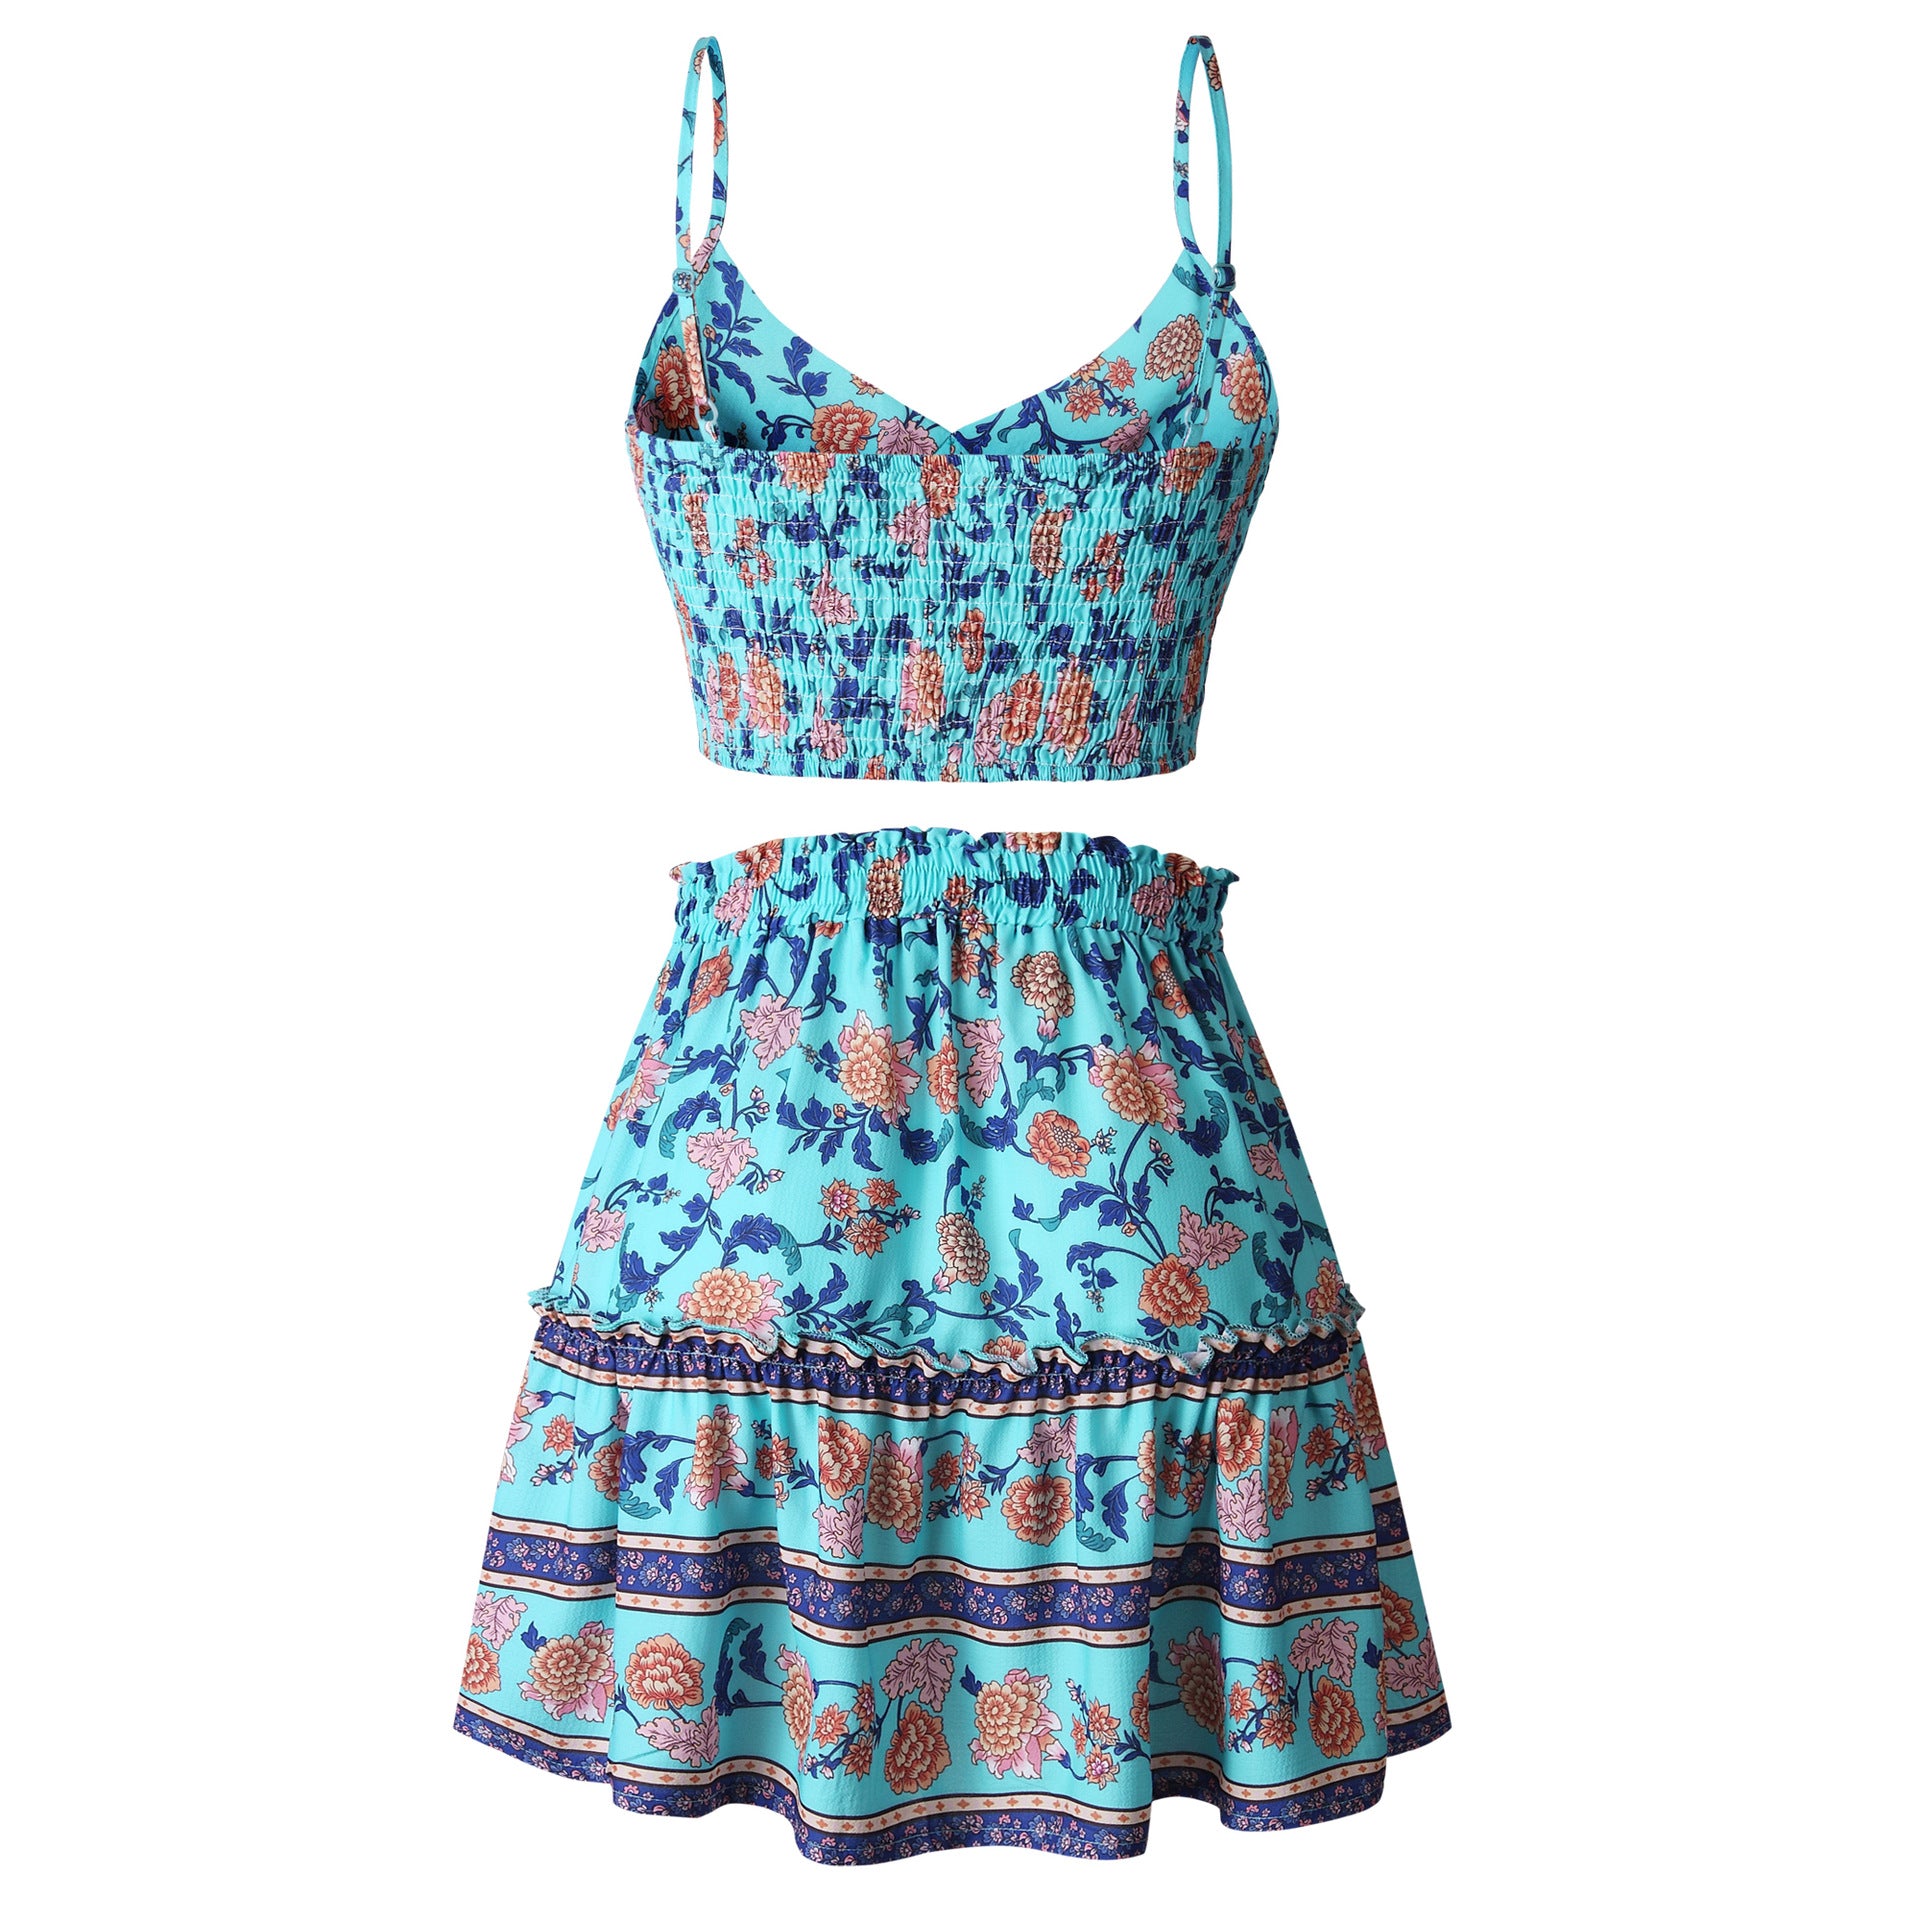 Turquoise Floral Crop Top and Skirt Matching Sets